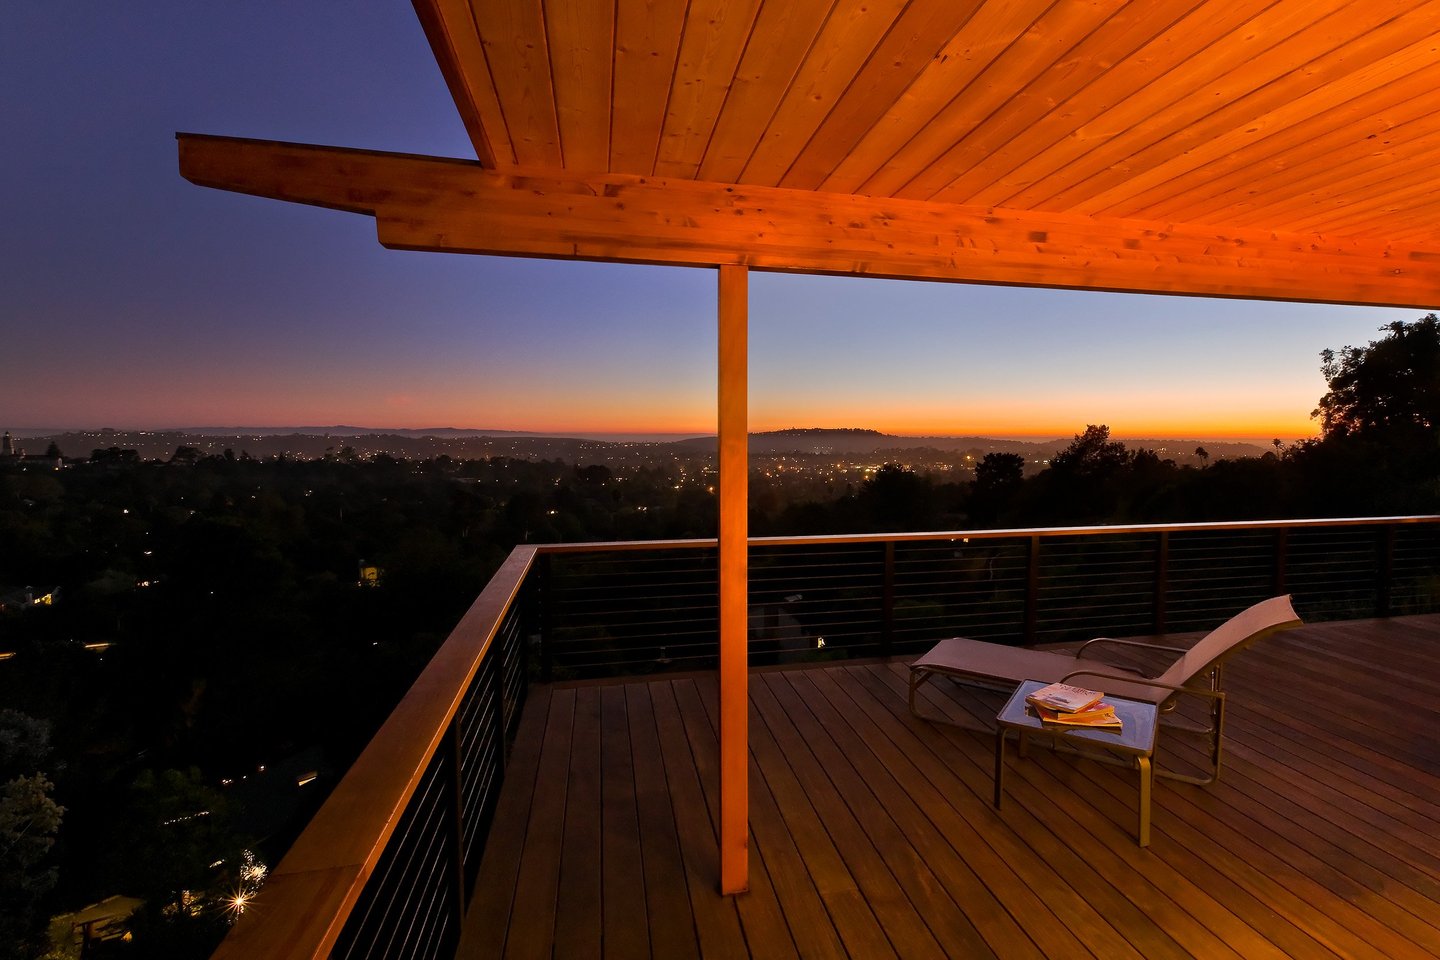 Mid-Century-Modern-Resdence-Santa Barbara and lounge chair with view at sunset@2x-13